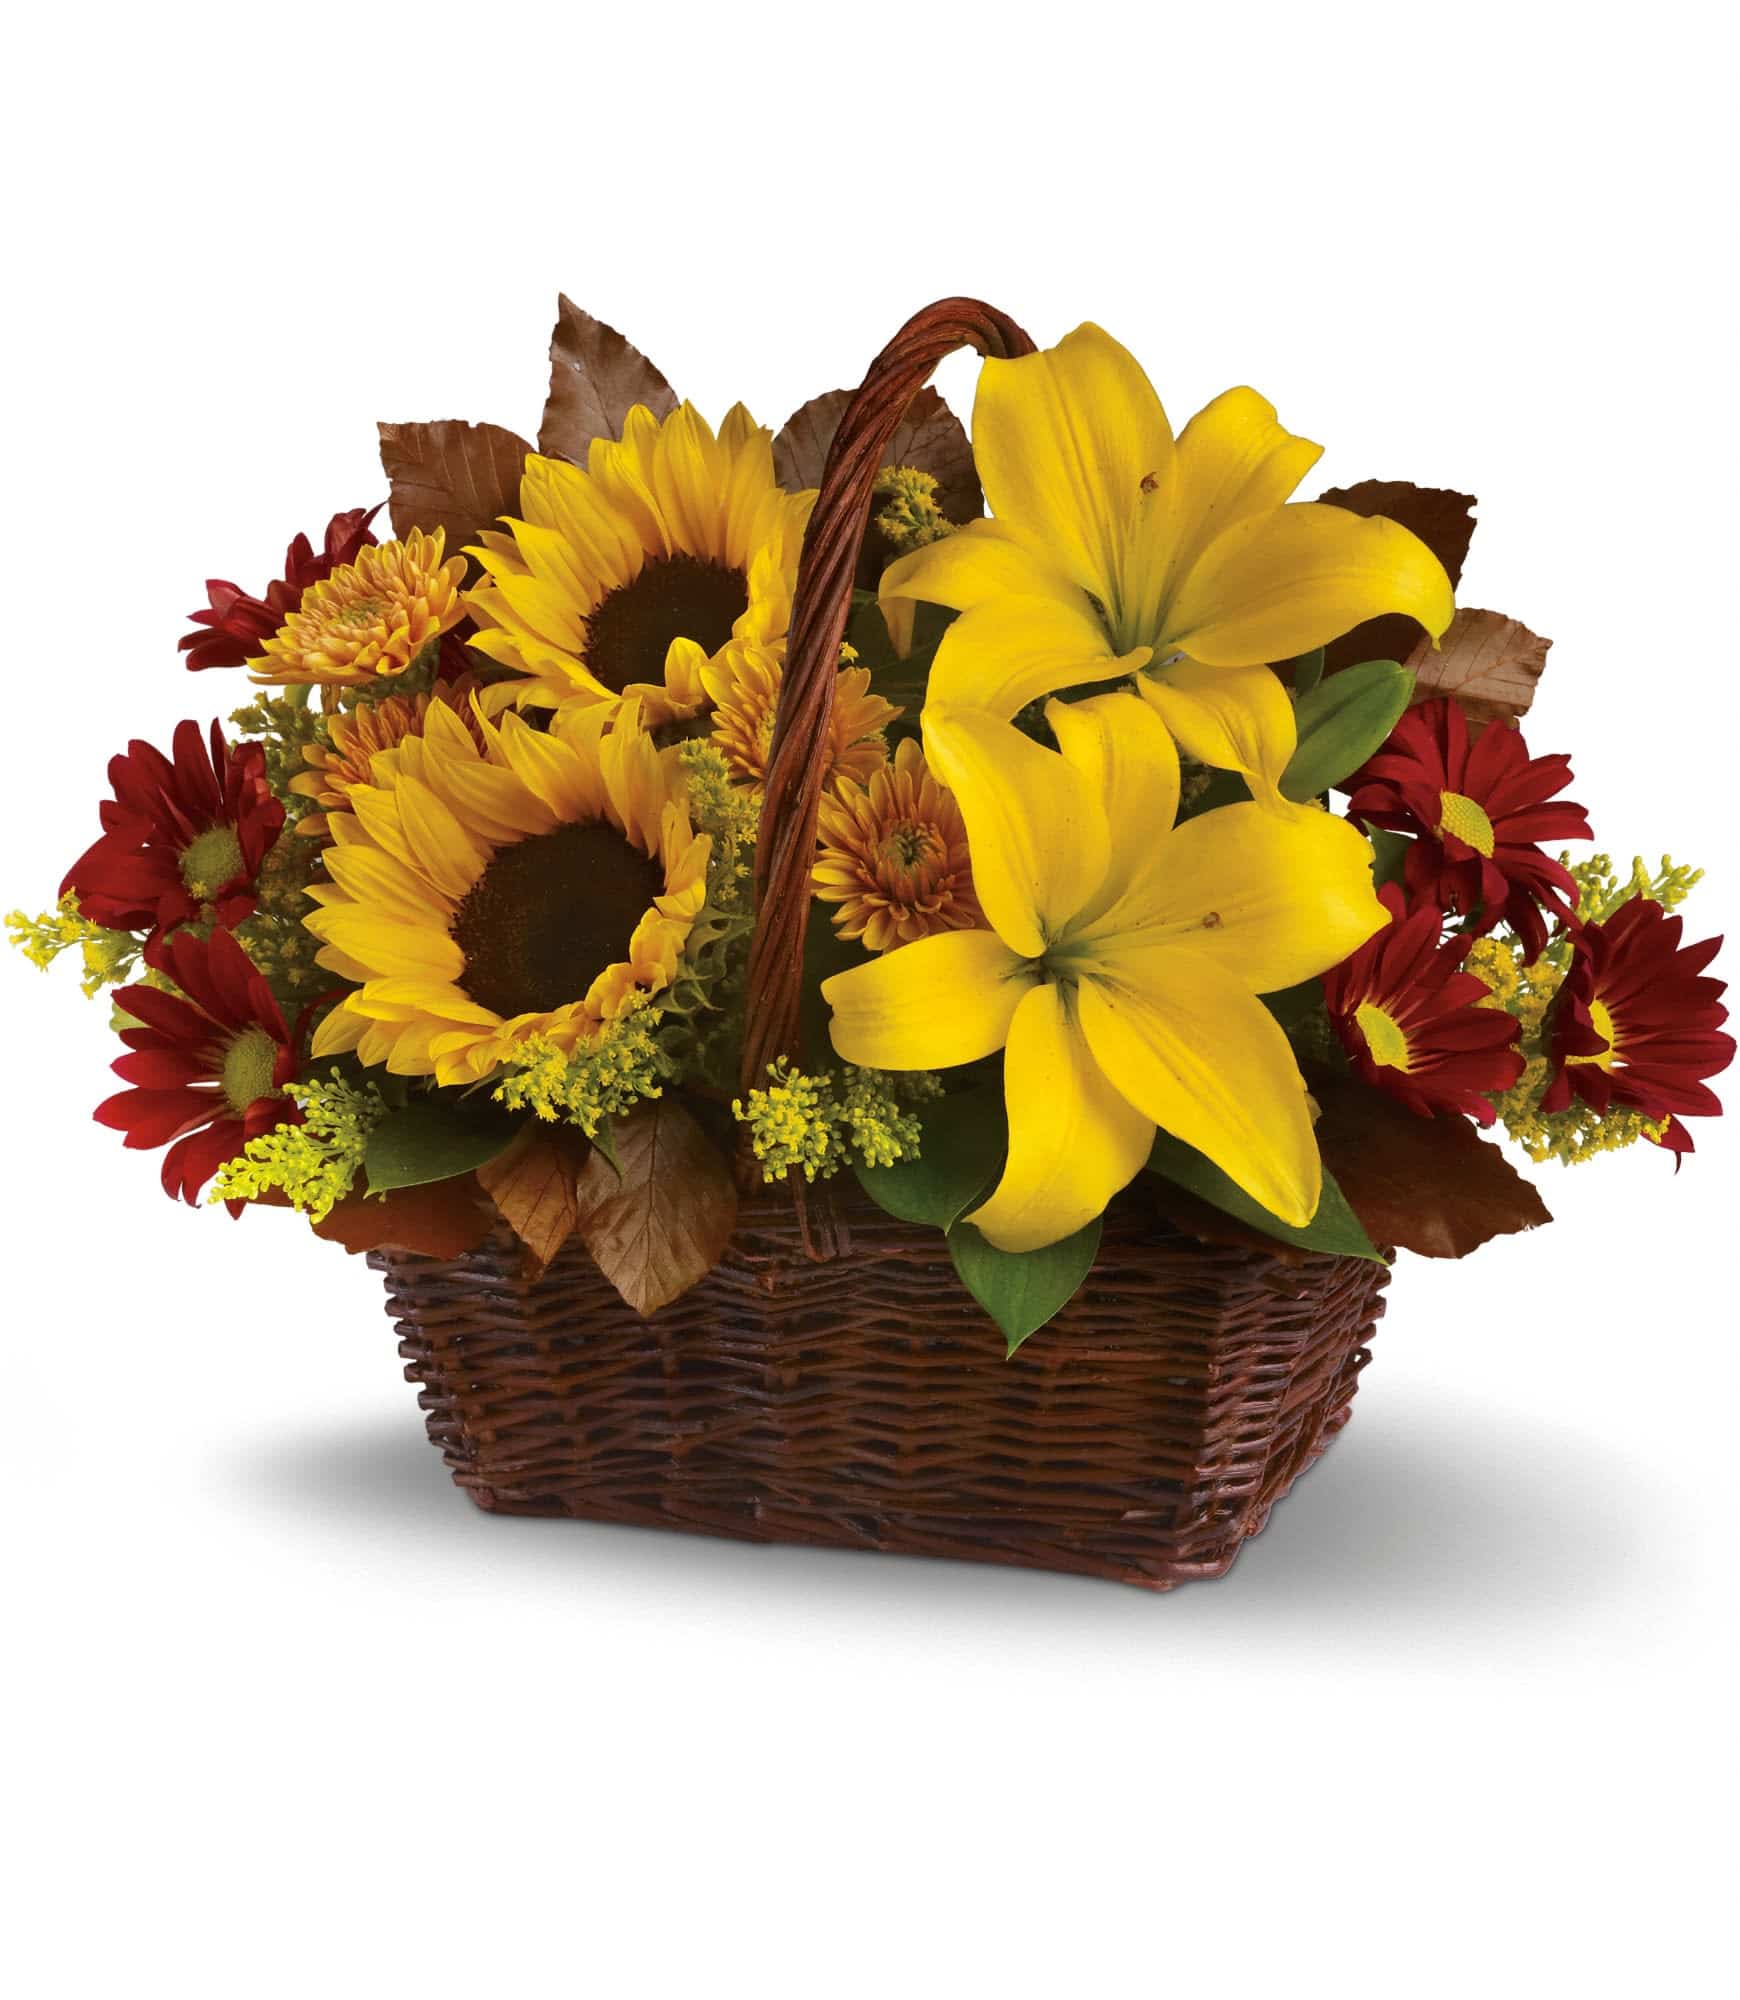 Asiatic Lilies and carnation in basket